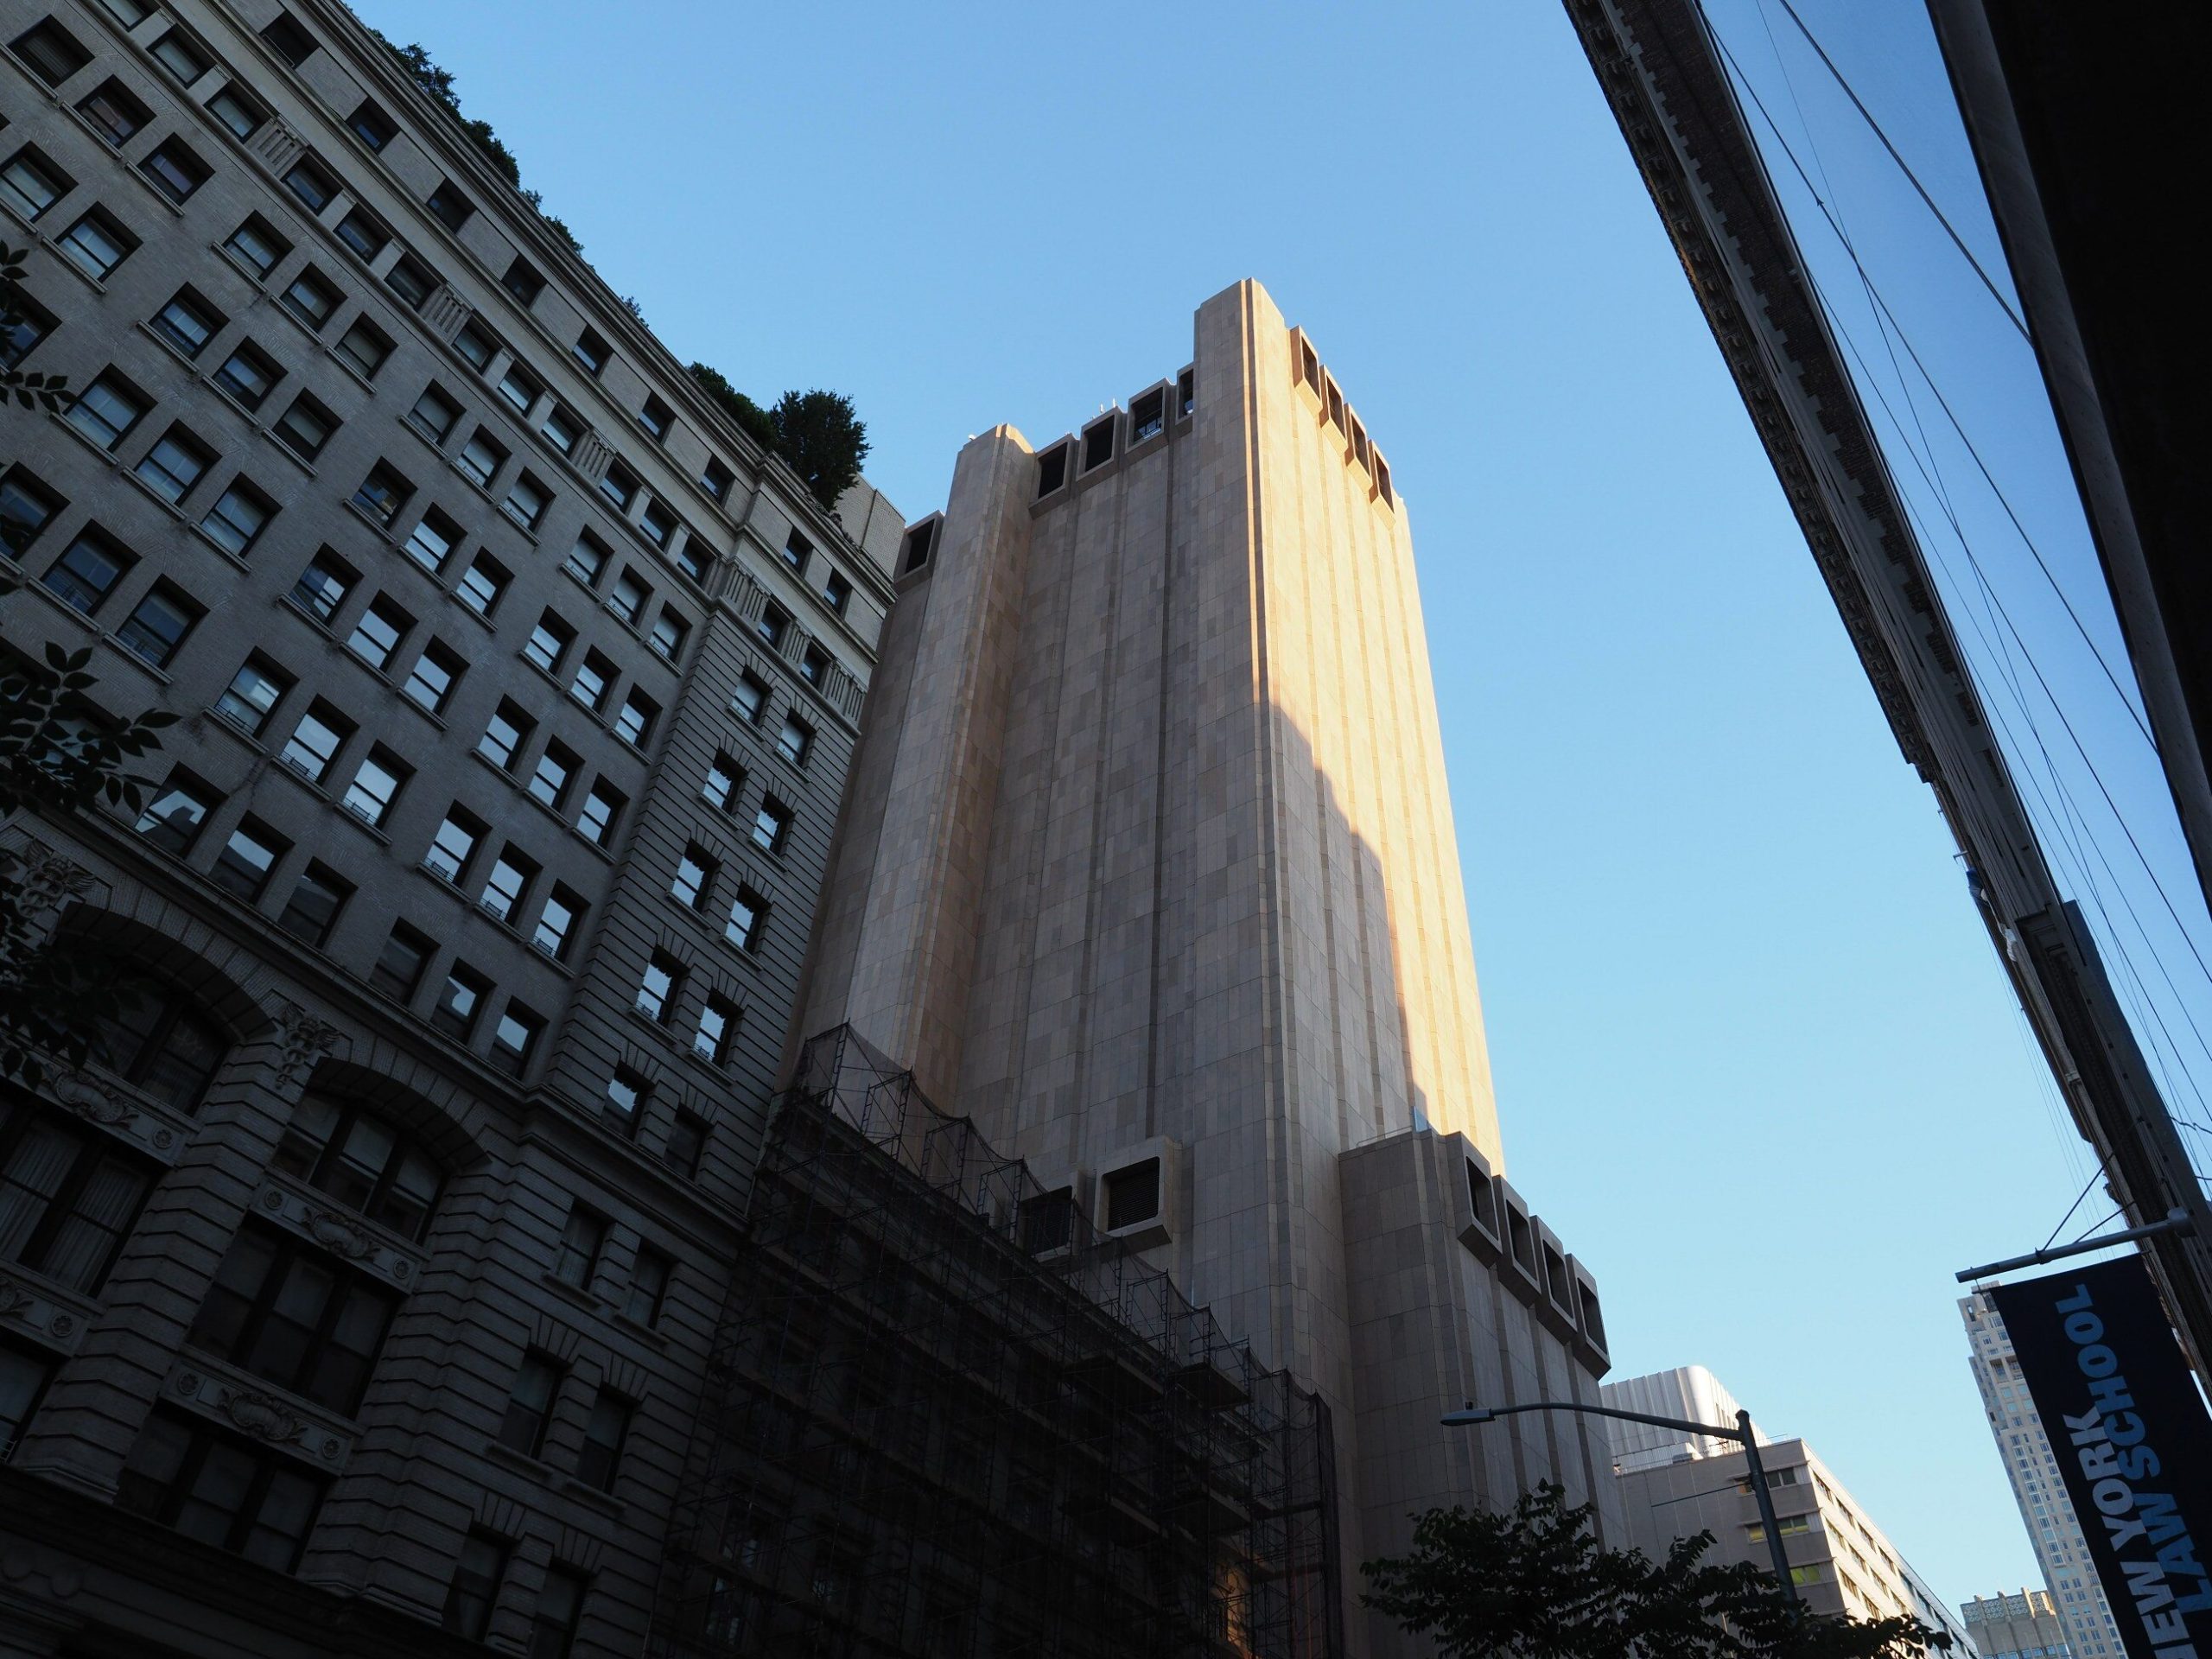 A mysterious windowless skyscraper in downtown New York.  "The Scariest I've Ever Seen"